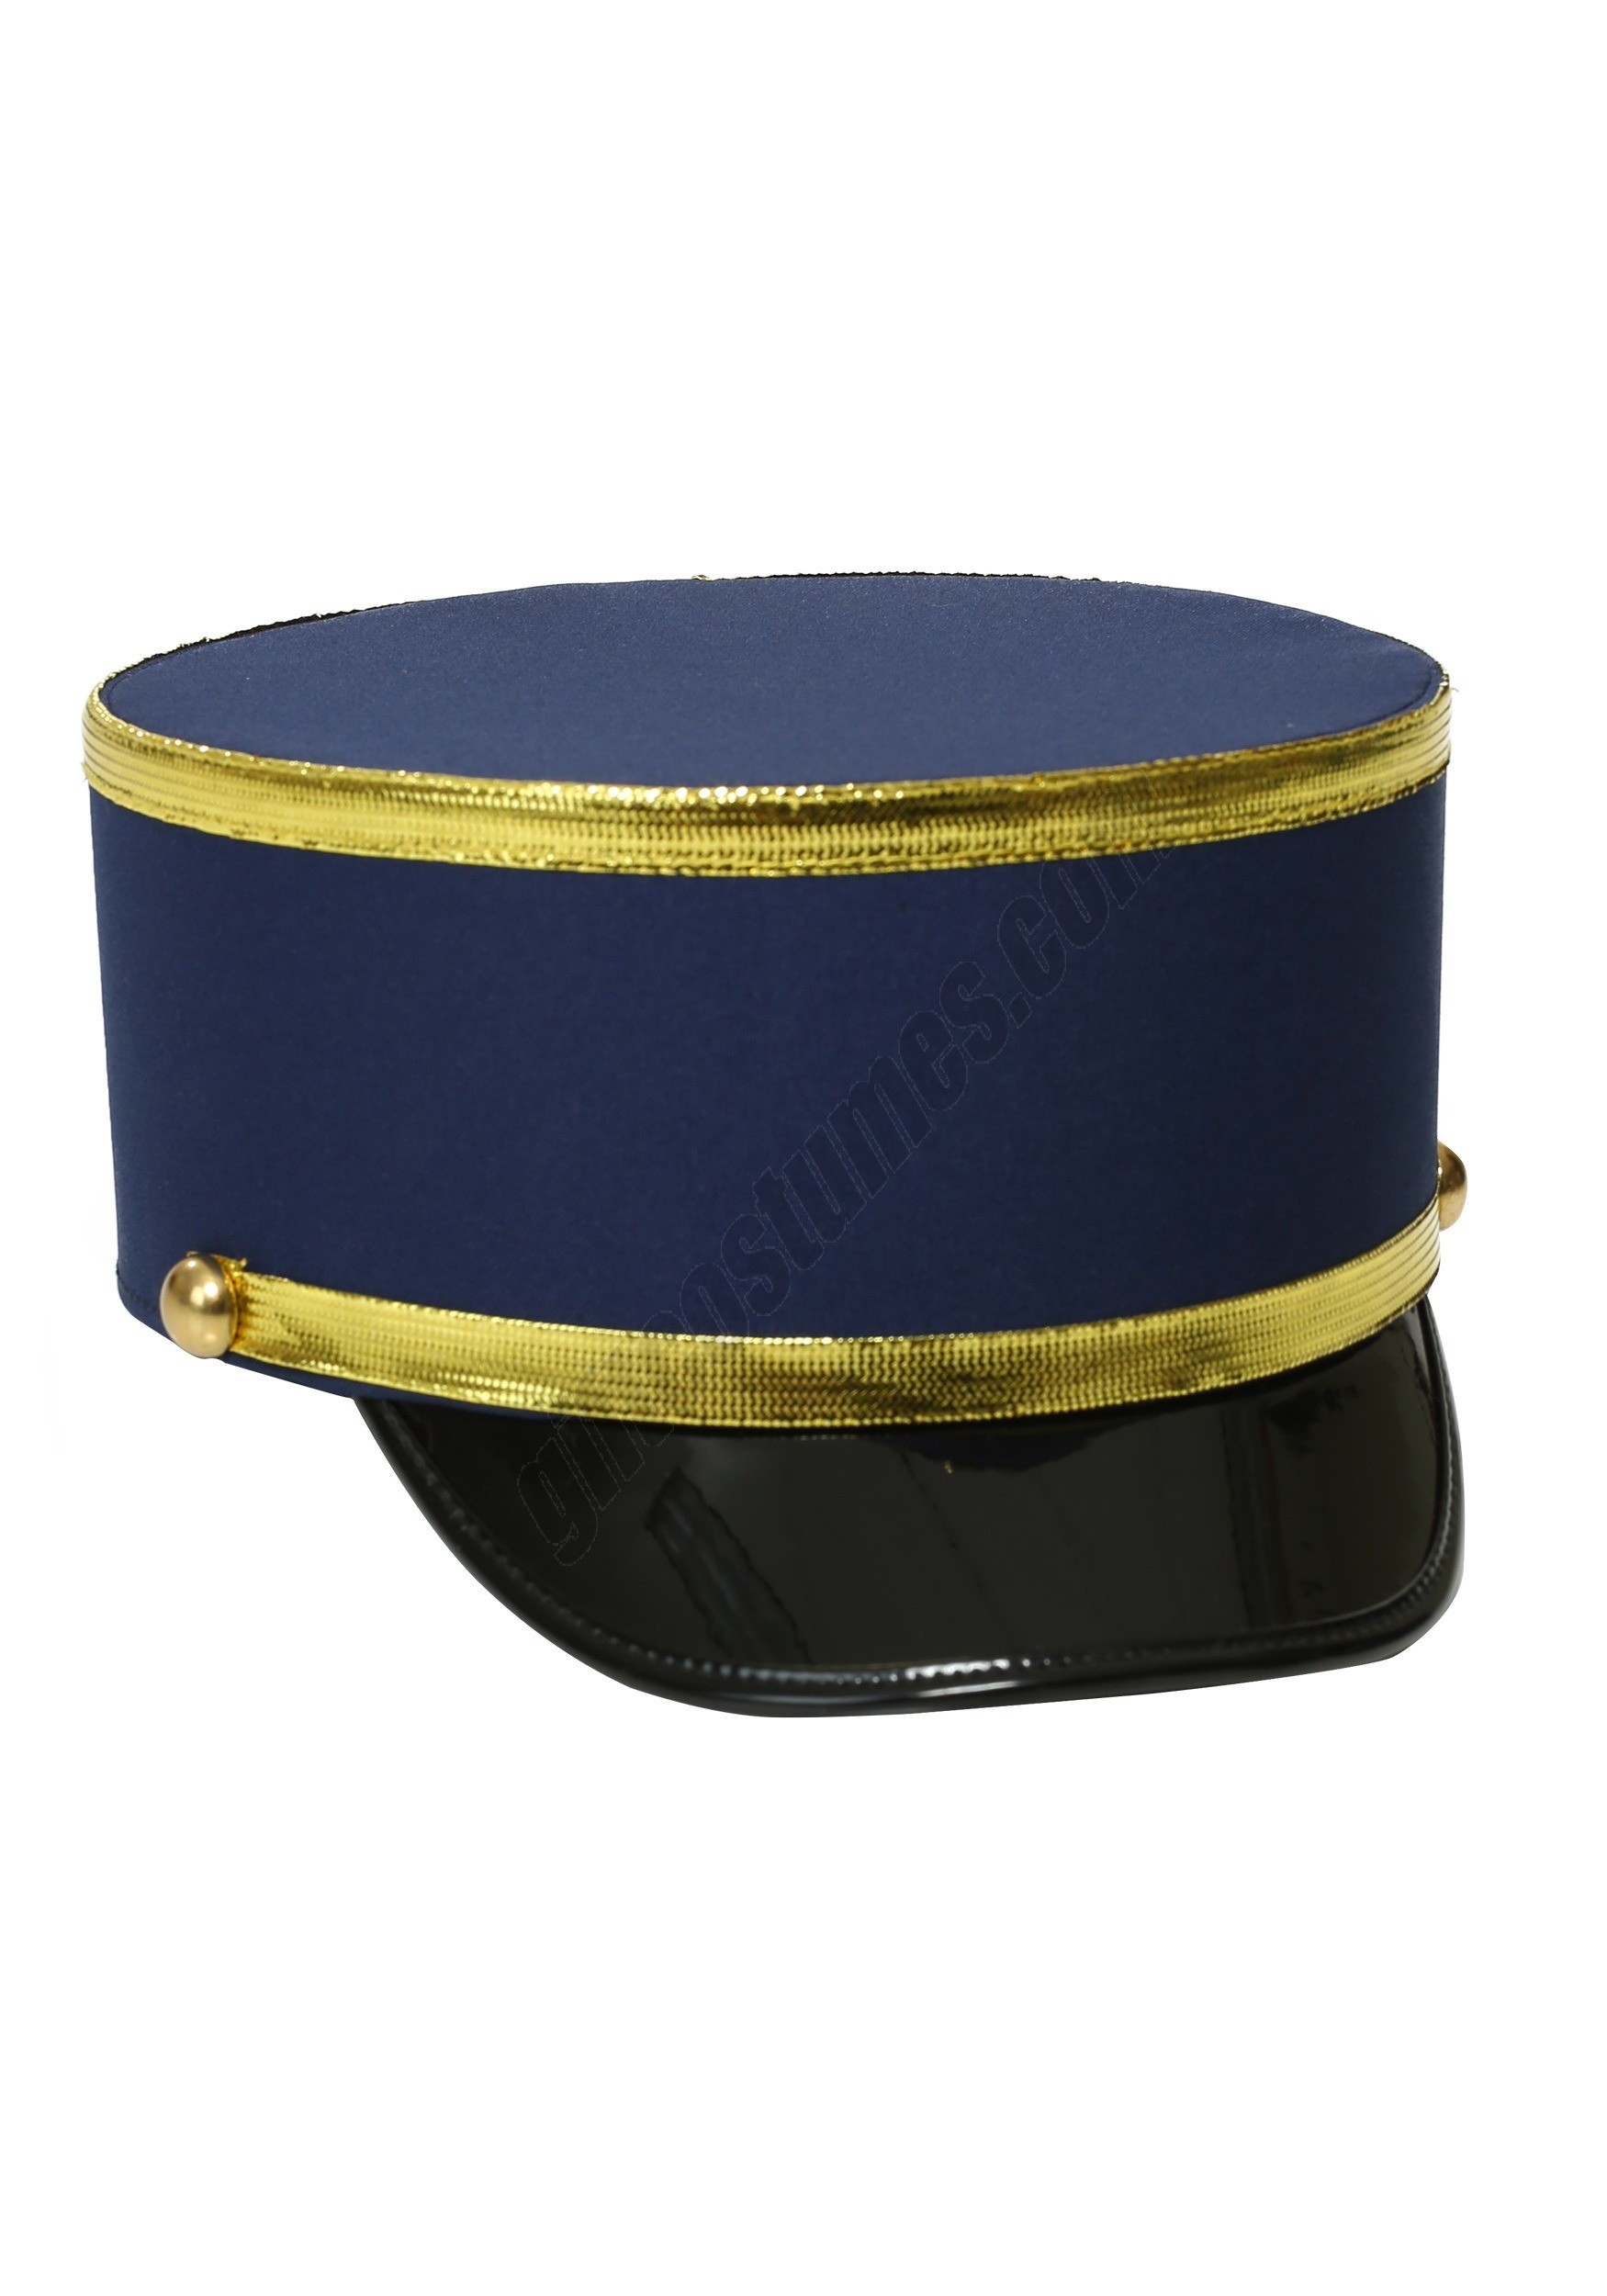 Child Conductor Hat Promotions - Child Conductor Hat Promotions